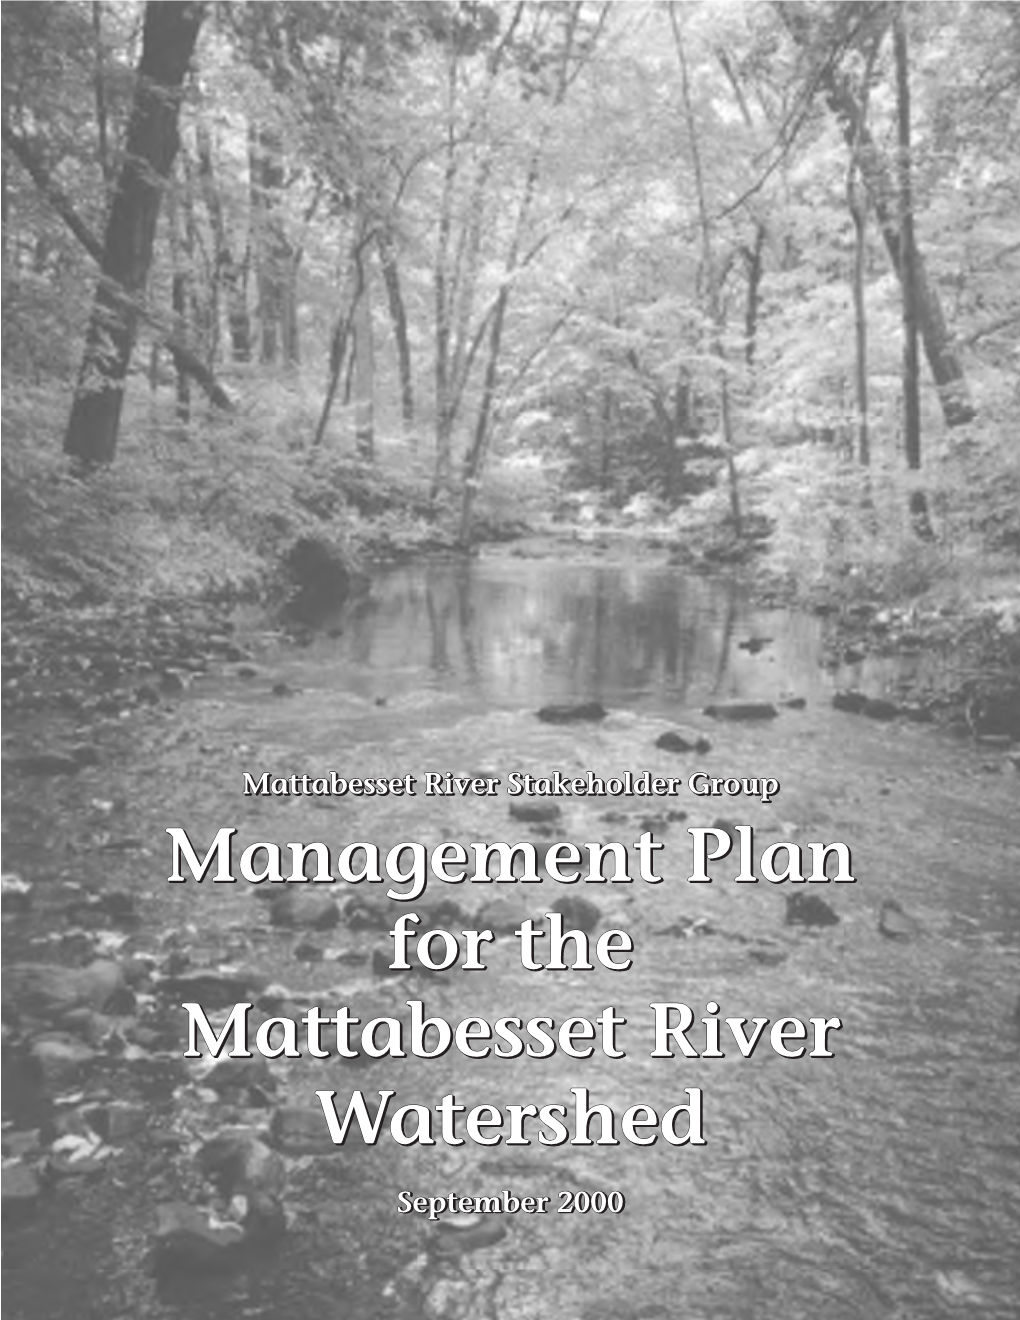 Management Plan for the Mattabesset River Watershed